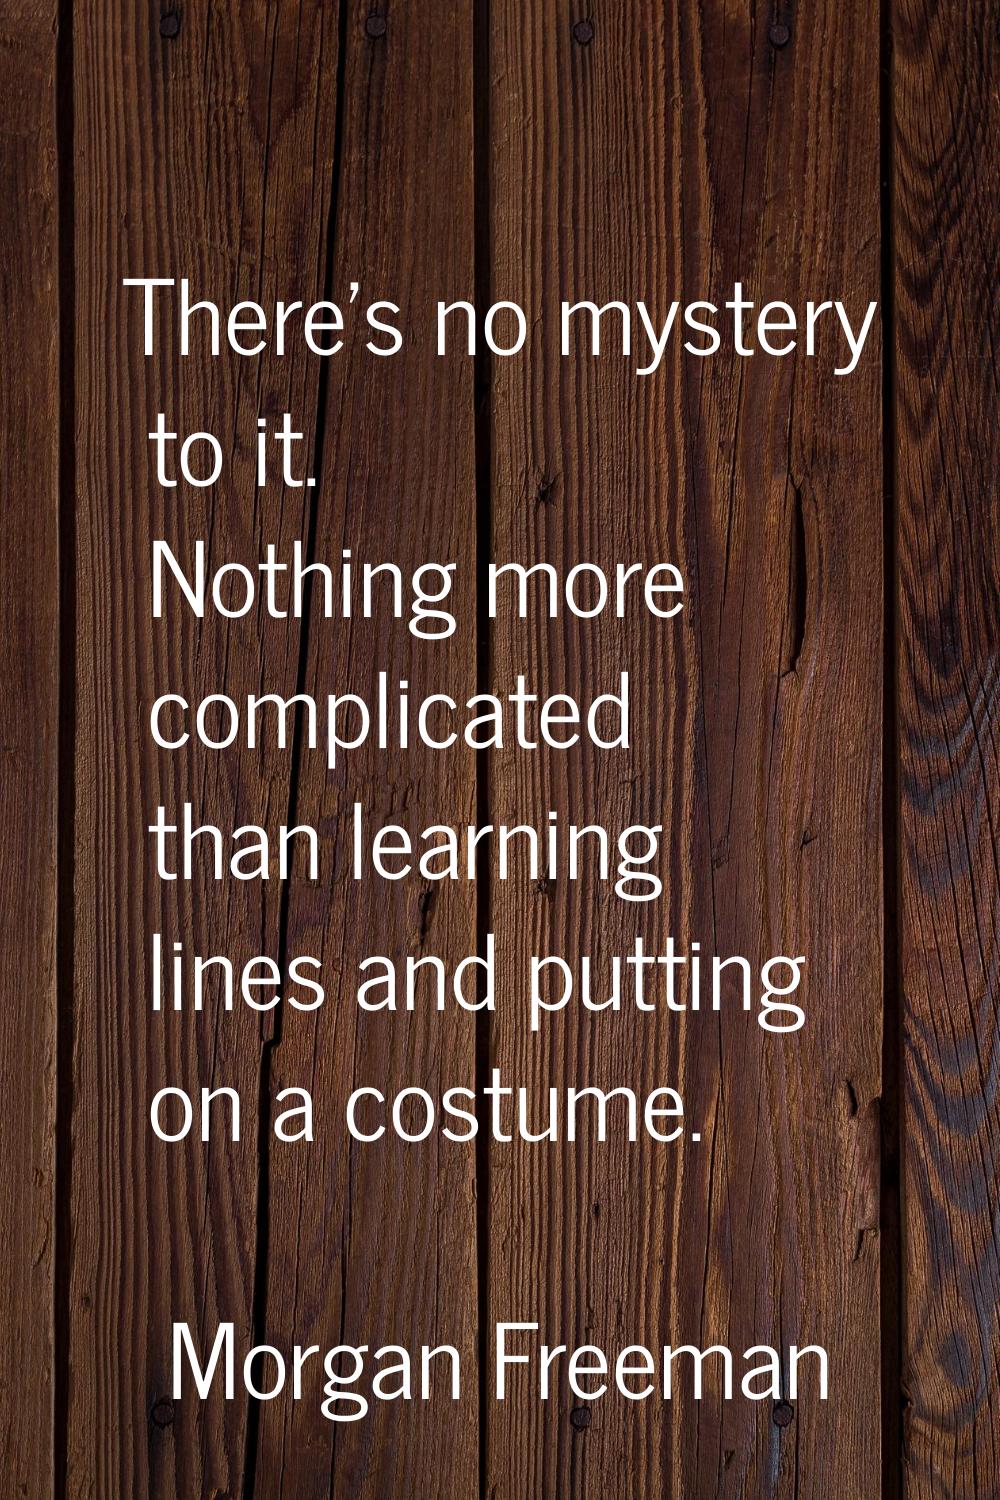 There's no mystery to it. Nothing more complicated than learning lines and putting on a costume.